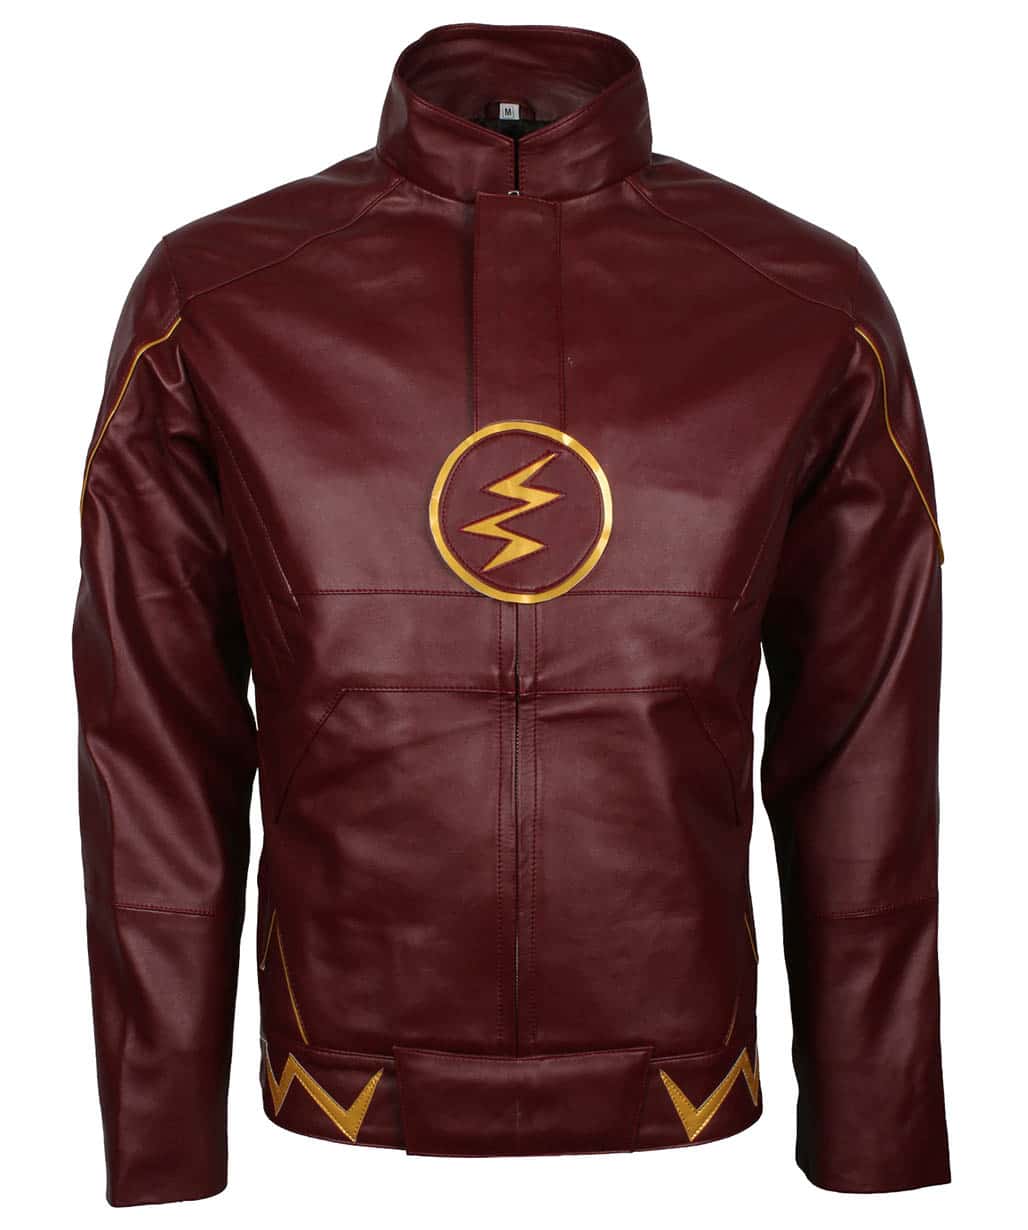 the-flash-barry-allen-grant-gustin-red-jacket